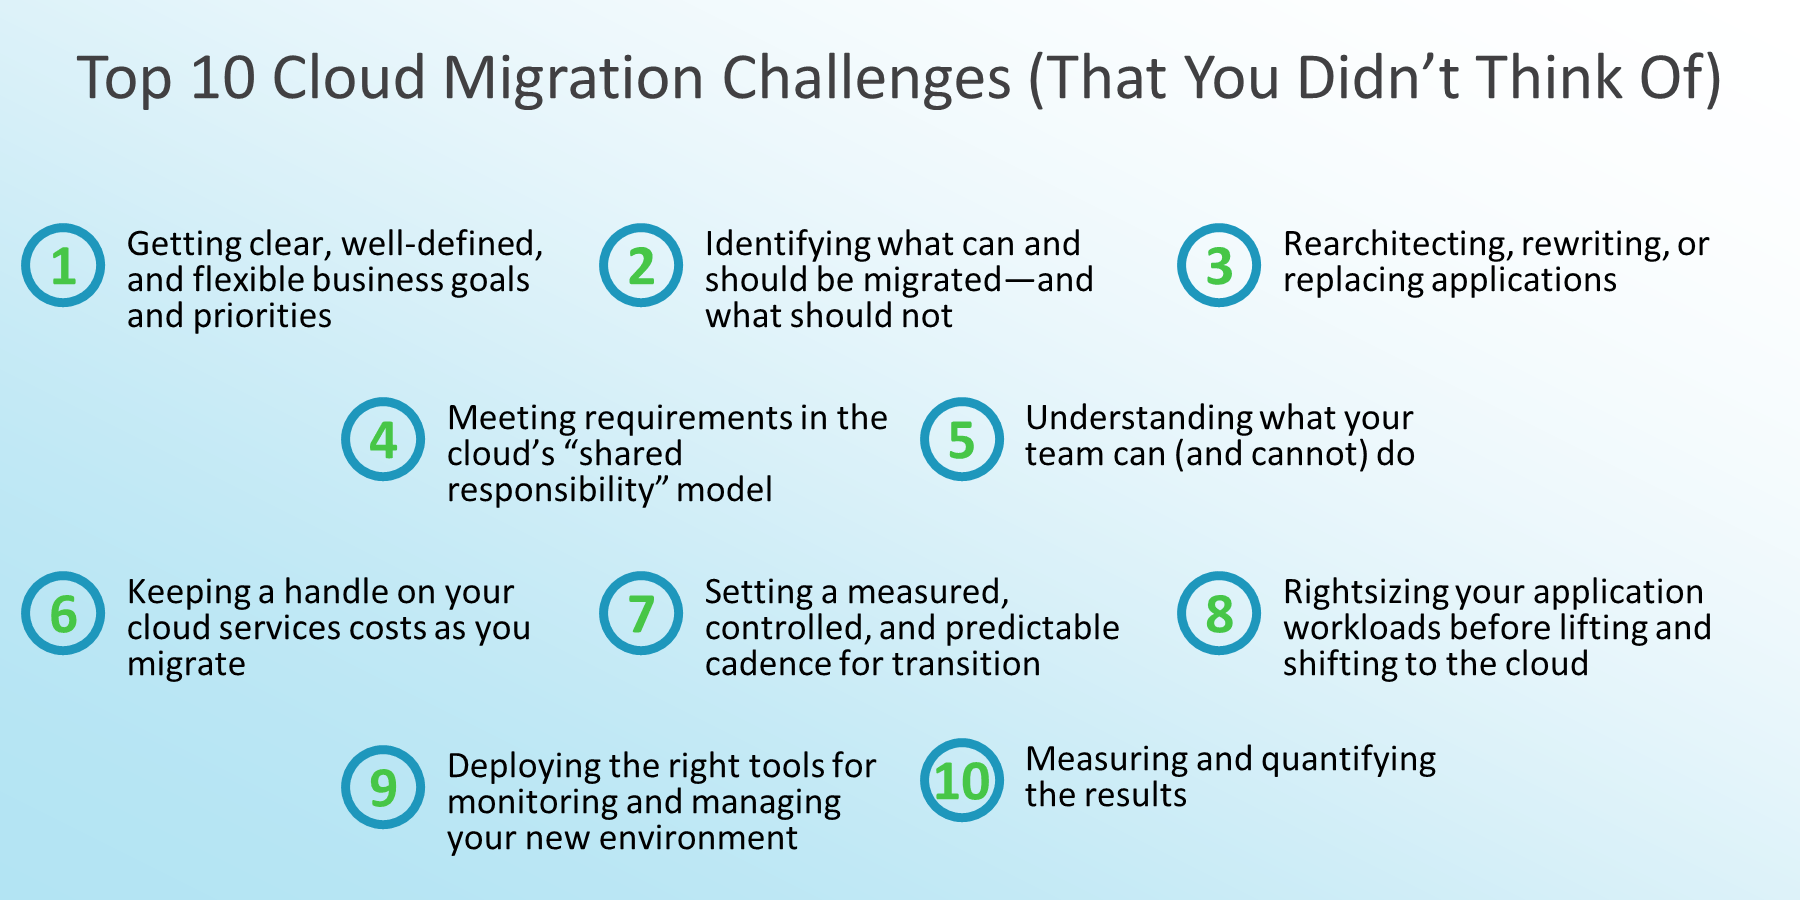 The top 10 cloud migration challenges (that you didn’t think of)